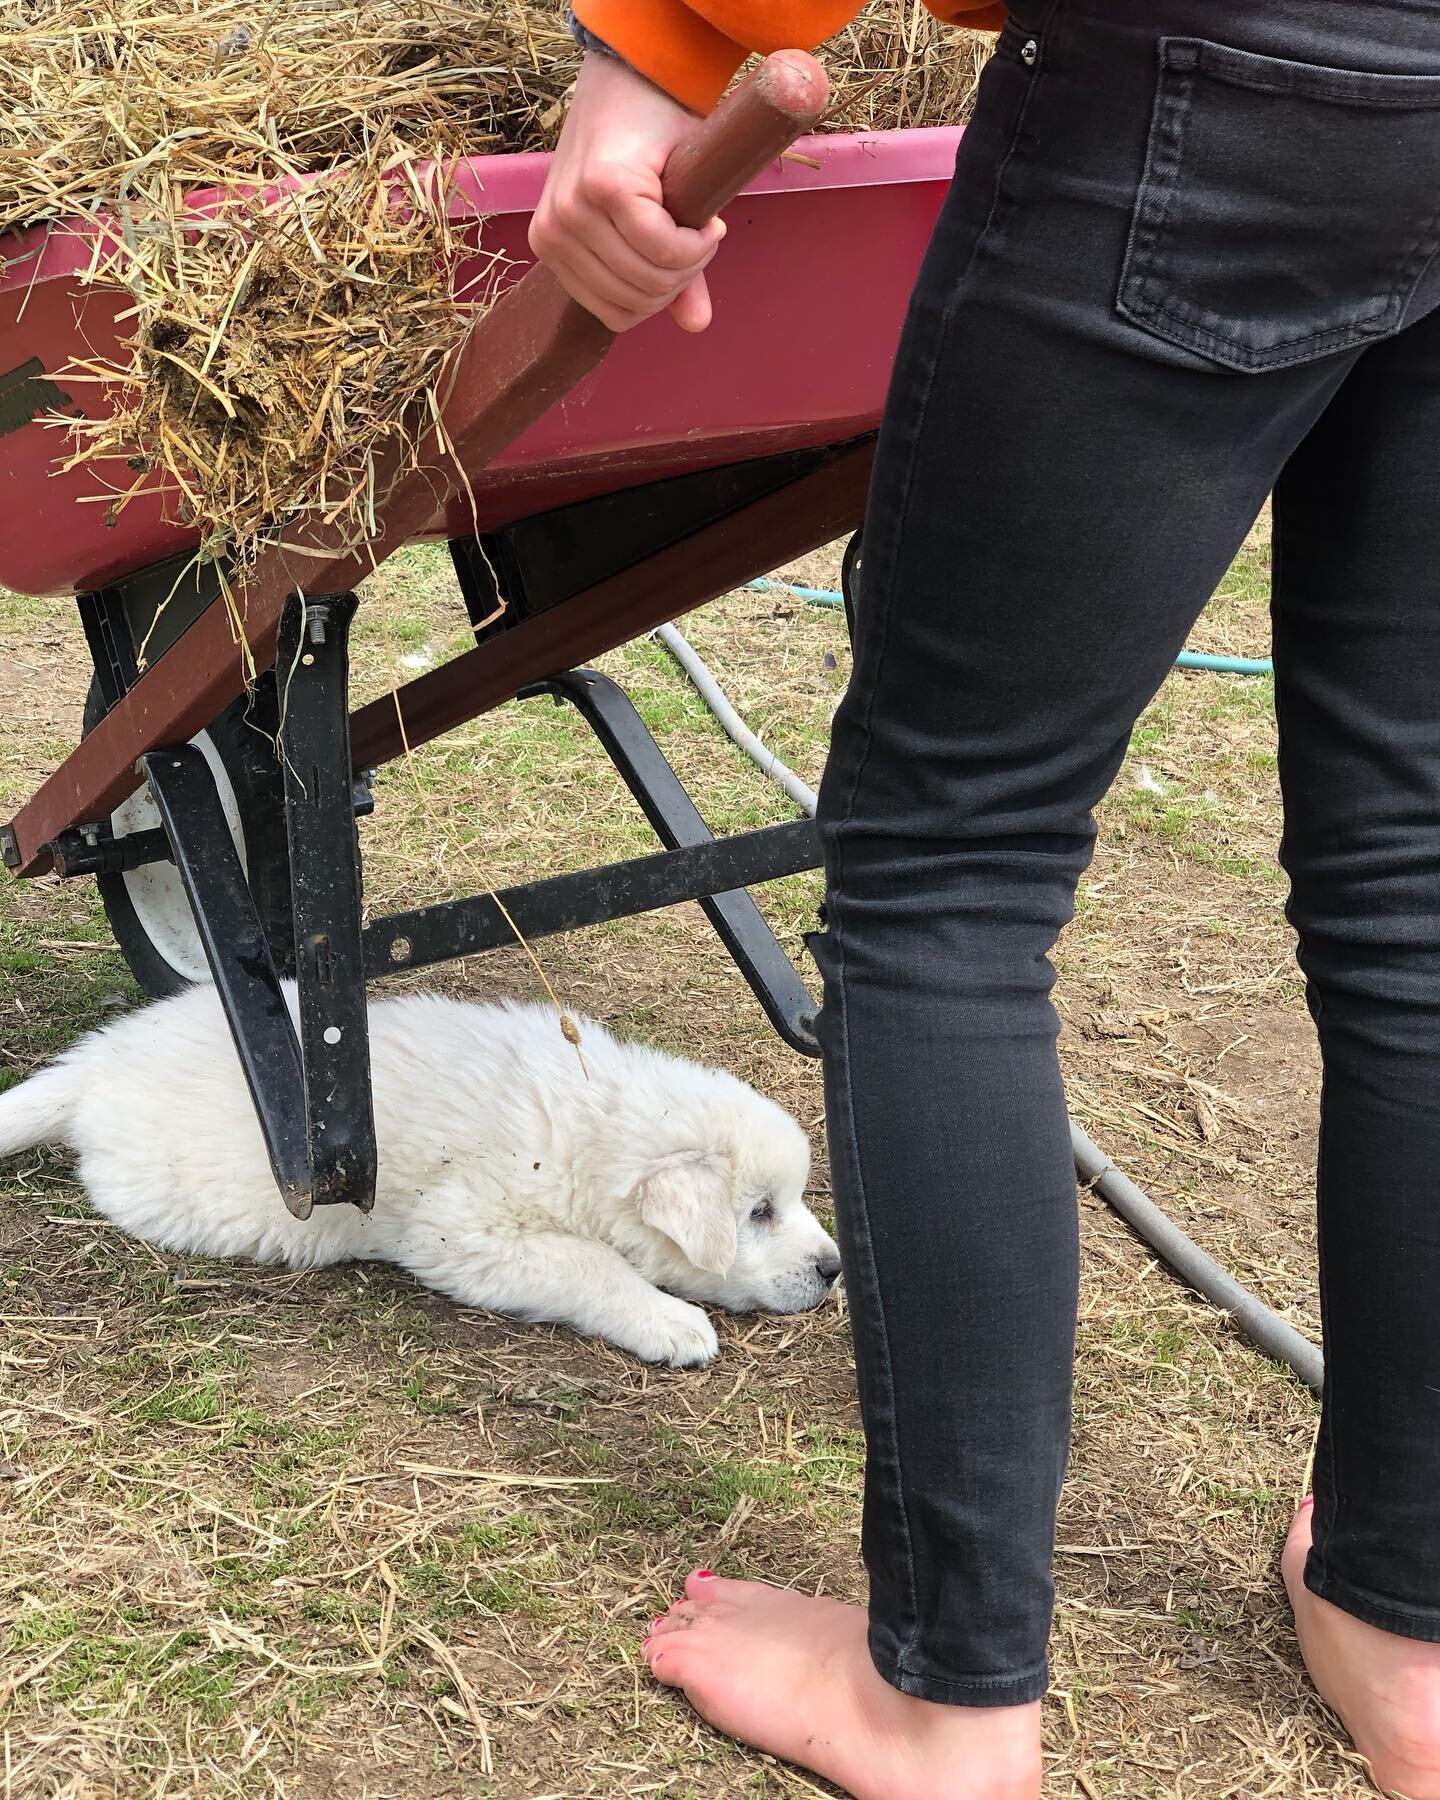 Wheelbarrows 🌾puppies 🐶 bare toes 👣 sunny day 🌞 

The long winter has faded away into brightening grass, baby farm animals, budding trees, grubby school books, and overall spring fever!

#kidsoftwinfolkfarms #livestockguardiandog #wildandfreekids